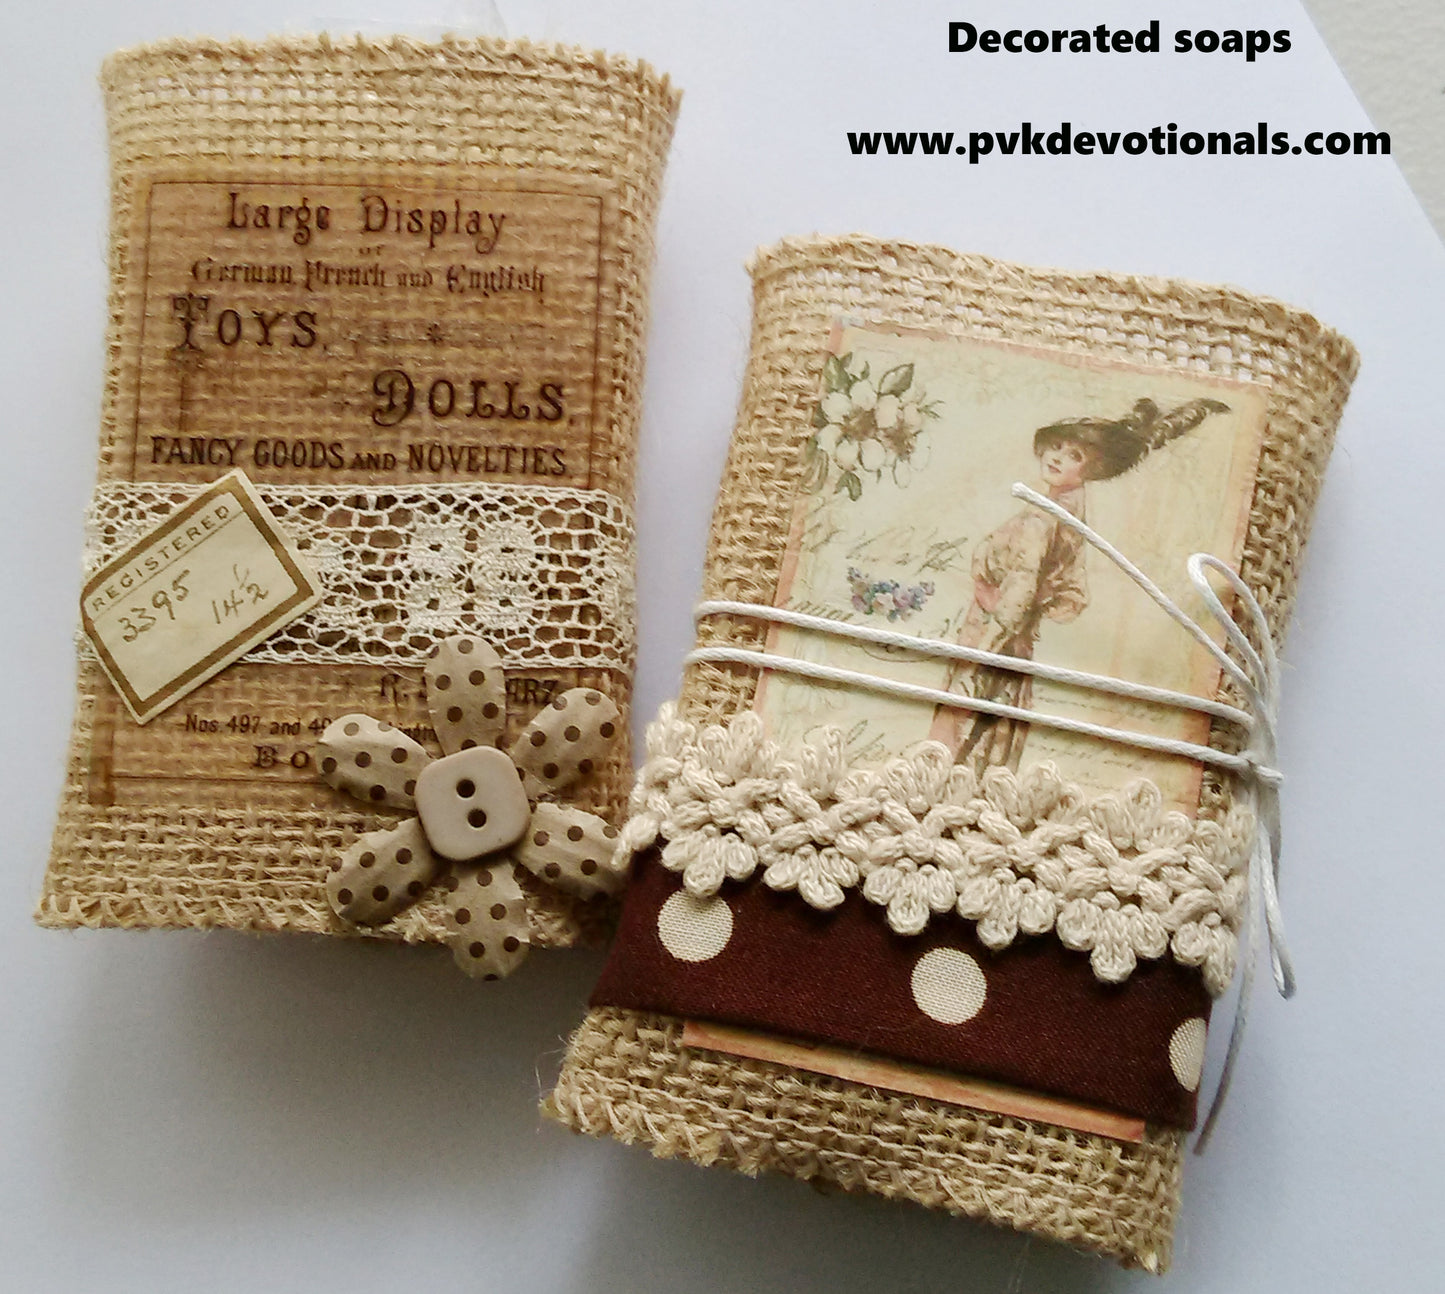 Set of 2 Scented Decorated Soaps in a Vintage Style.